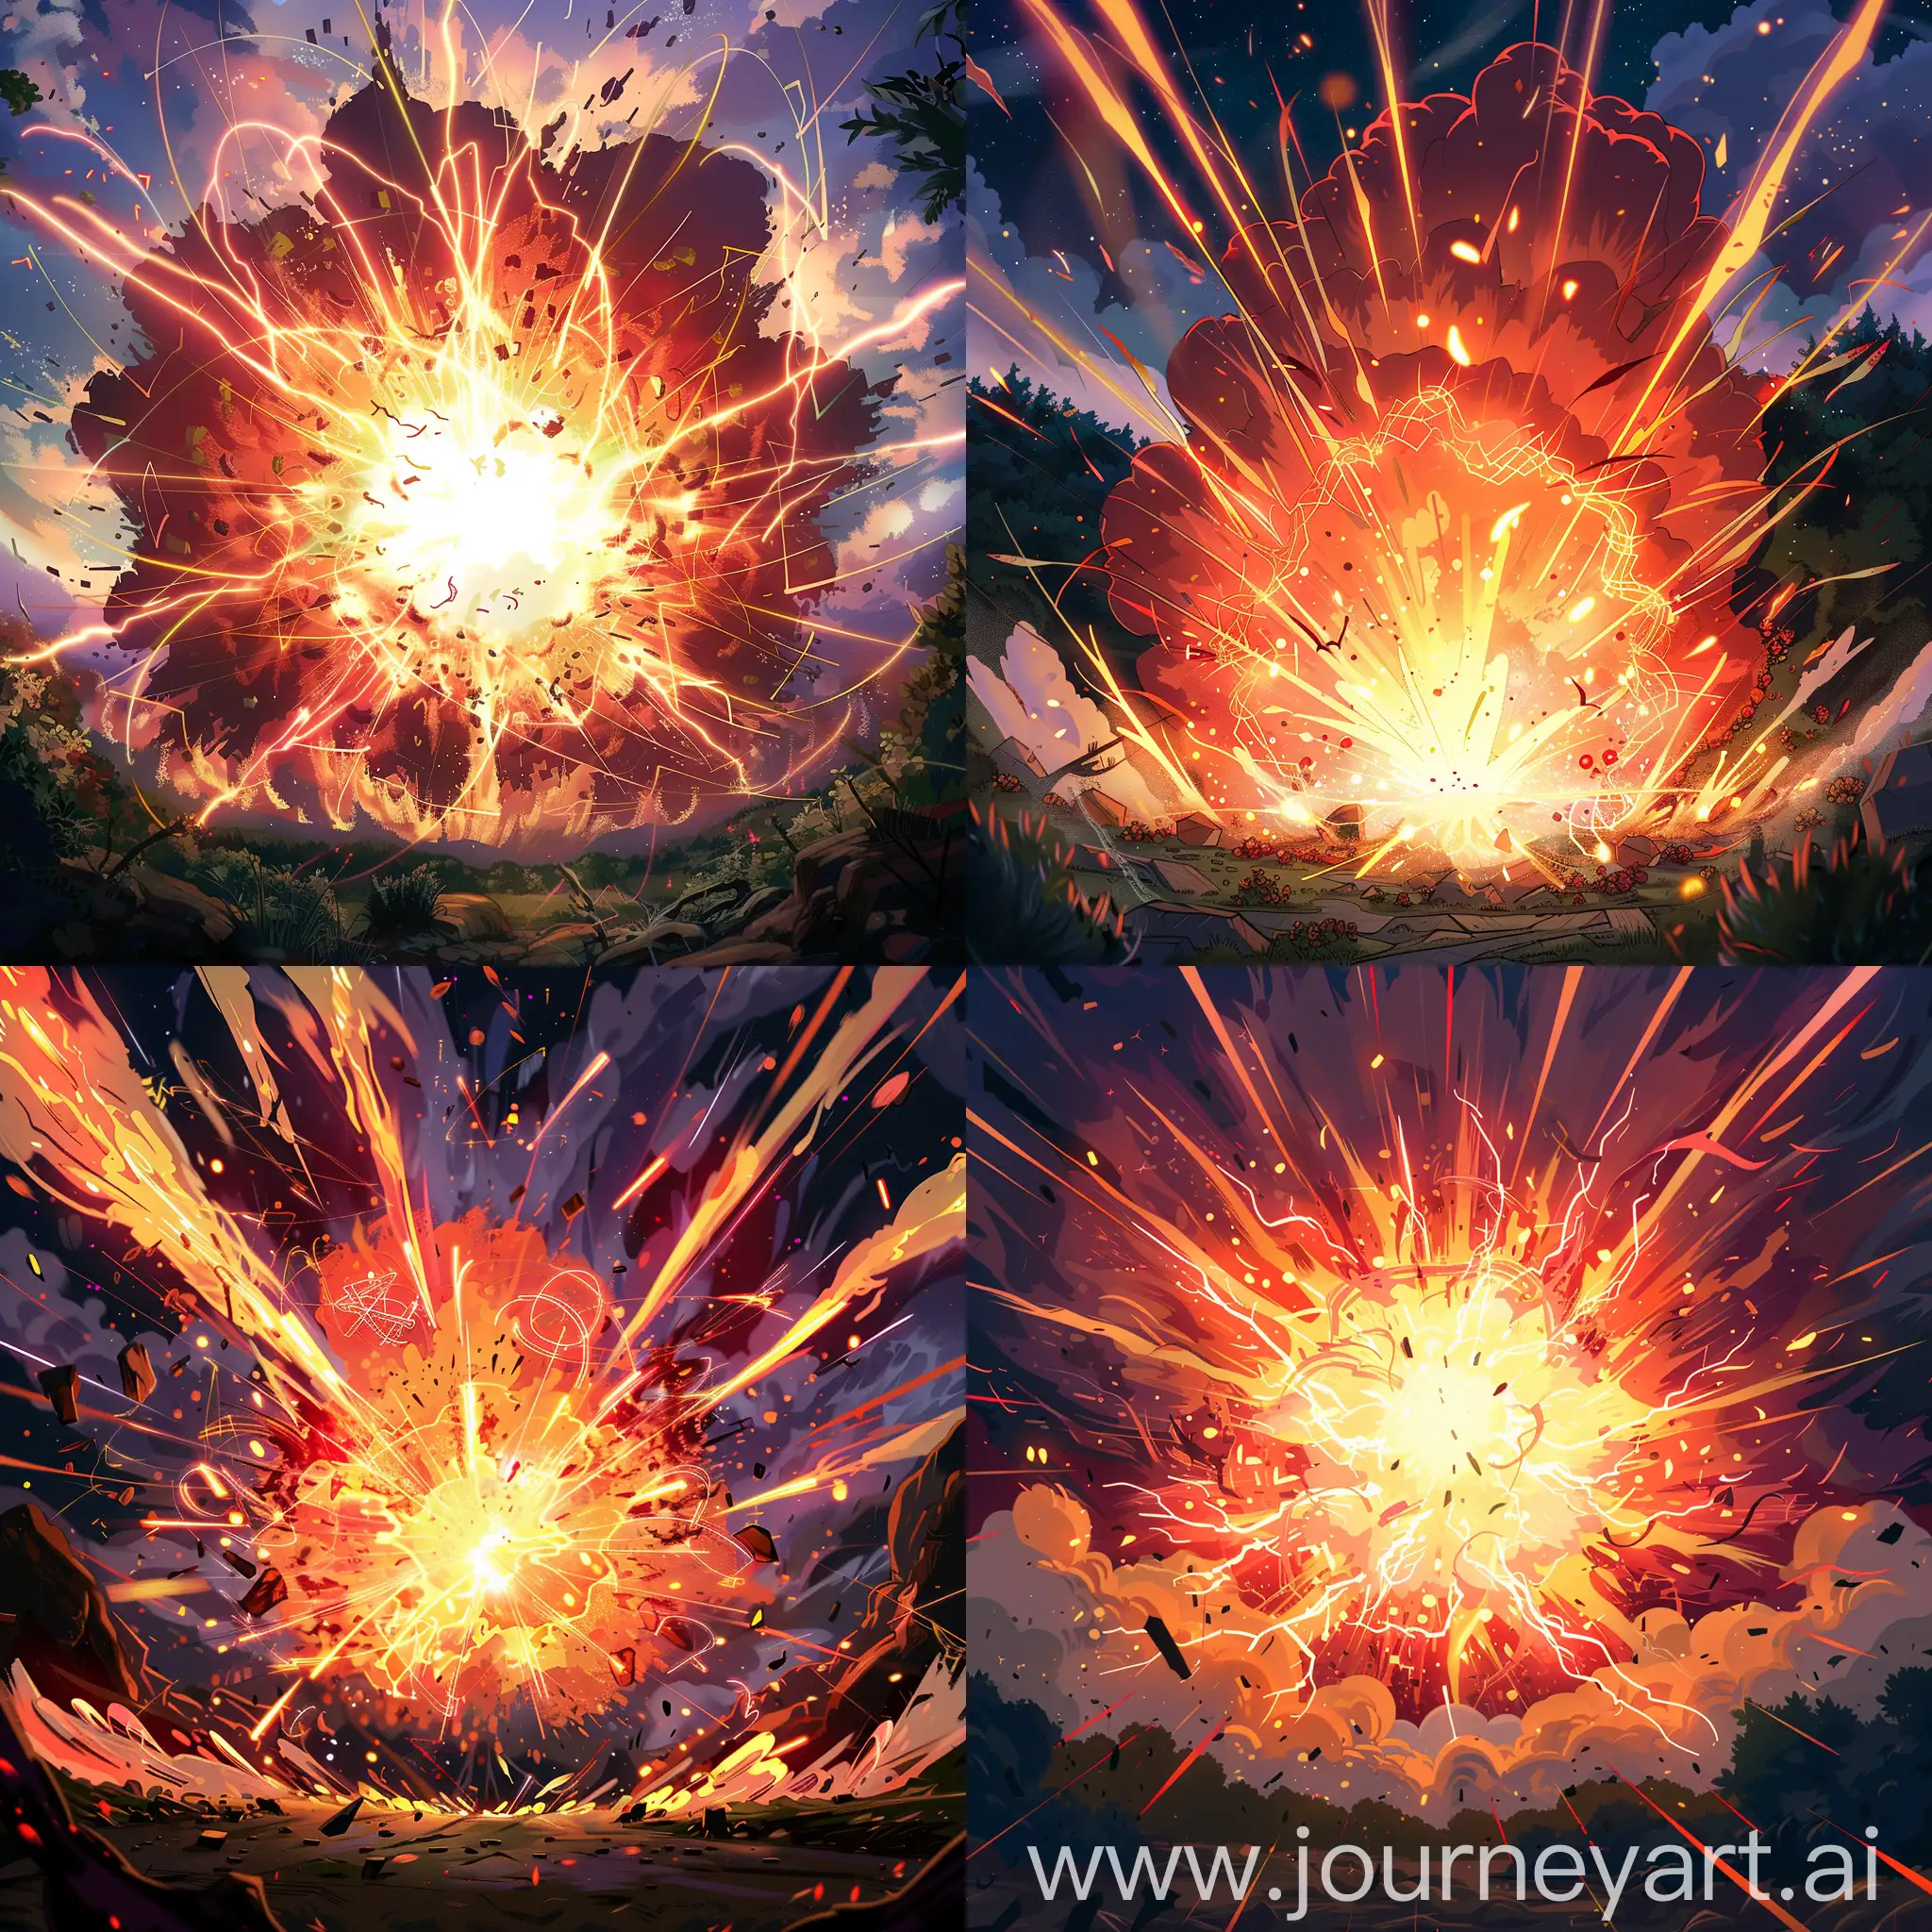 Create a 2D anime-style scene where the female demon child god unleashes a massive explosion. The explosion is characterized by a blinding burst of light at the center, surrounded by vibrant shades of red, orange, and yellow, signifying its intense heat and power. Magical energy arcs and runes are visible within the explosion, hinting at the godly origin of this cataclysmic attack. Shockwaves emanate from the epicenter, distorting the air and sending debris flying in all directions. The surrounding landscape is illuminated by the fierce glow of the explosion, casting long, dramatic shadows. This artwork should capture the moment of release, where the demon child god's power is fully manifested in a spectacular display of destruction, typical of high-energy anime sequences.